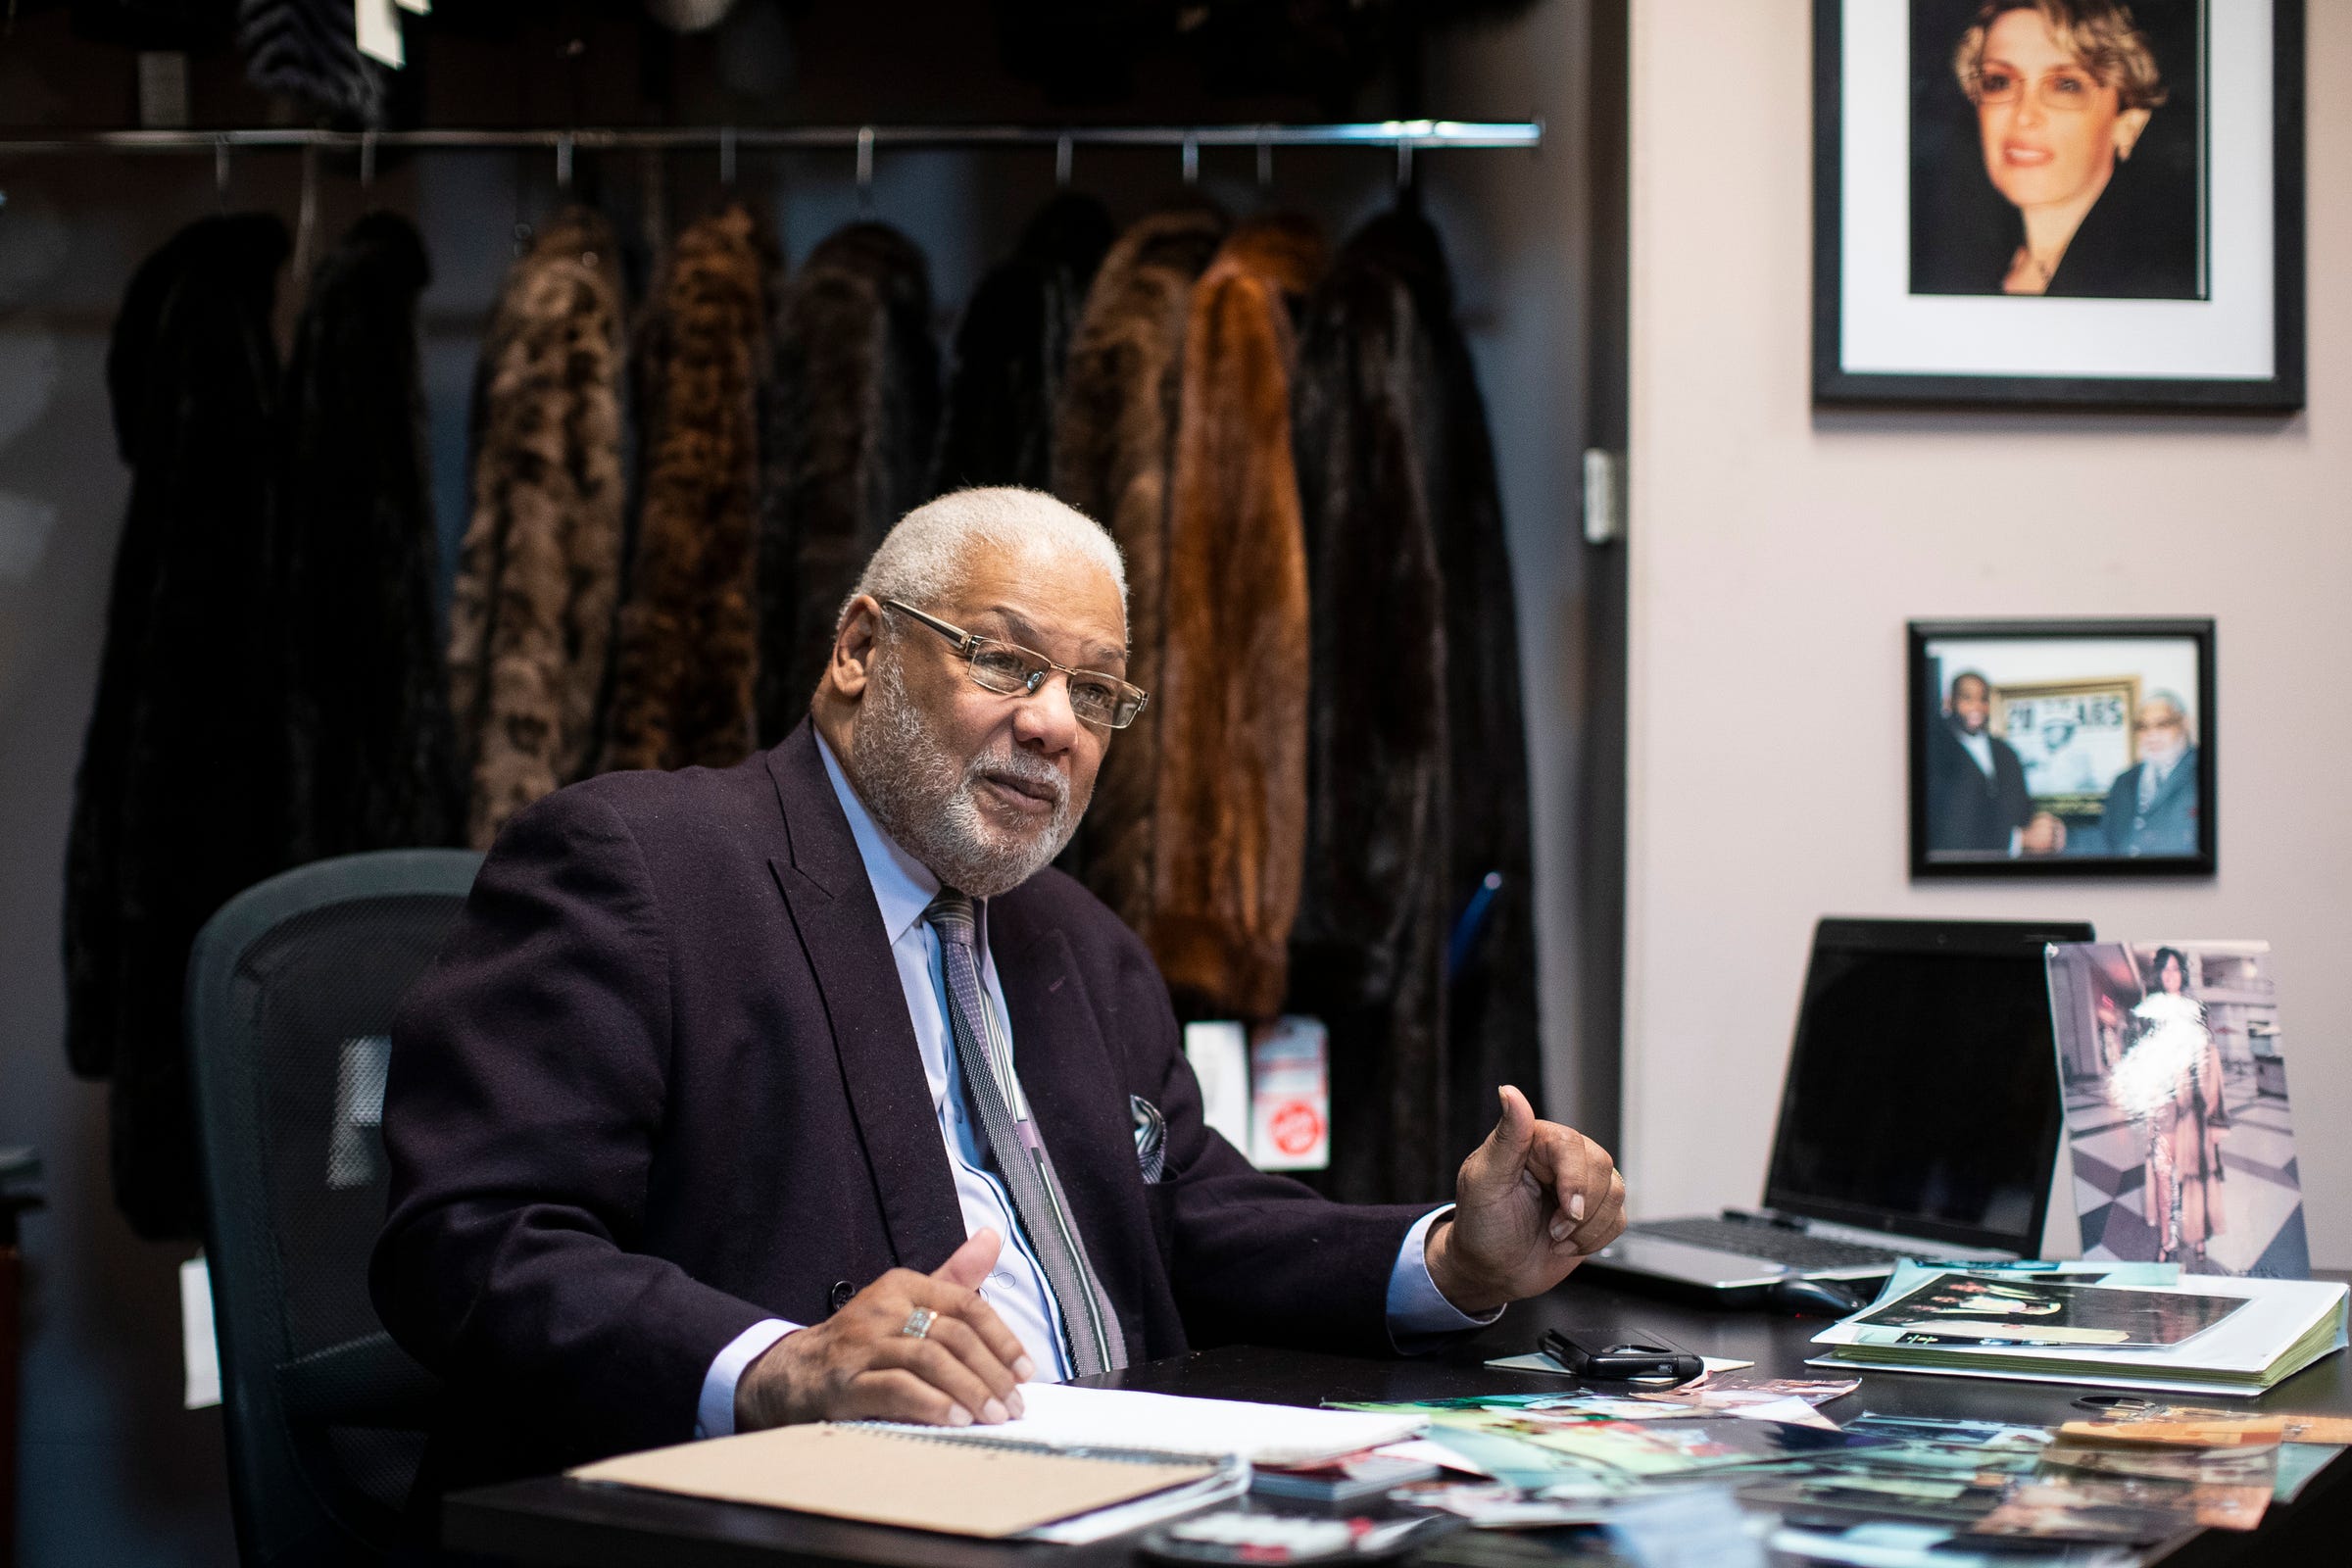 Owner Richard Welch at Silver Fox Fur in Detroit, Saturday, March 14, 2020.